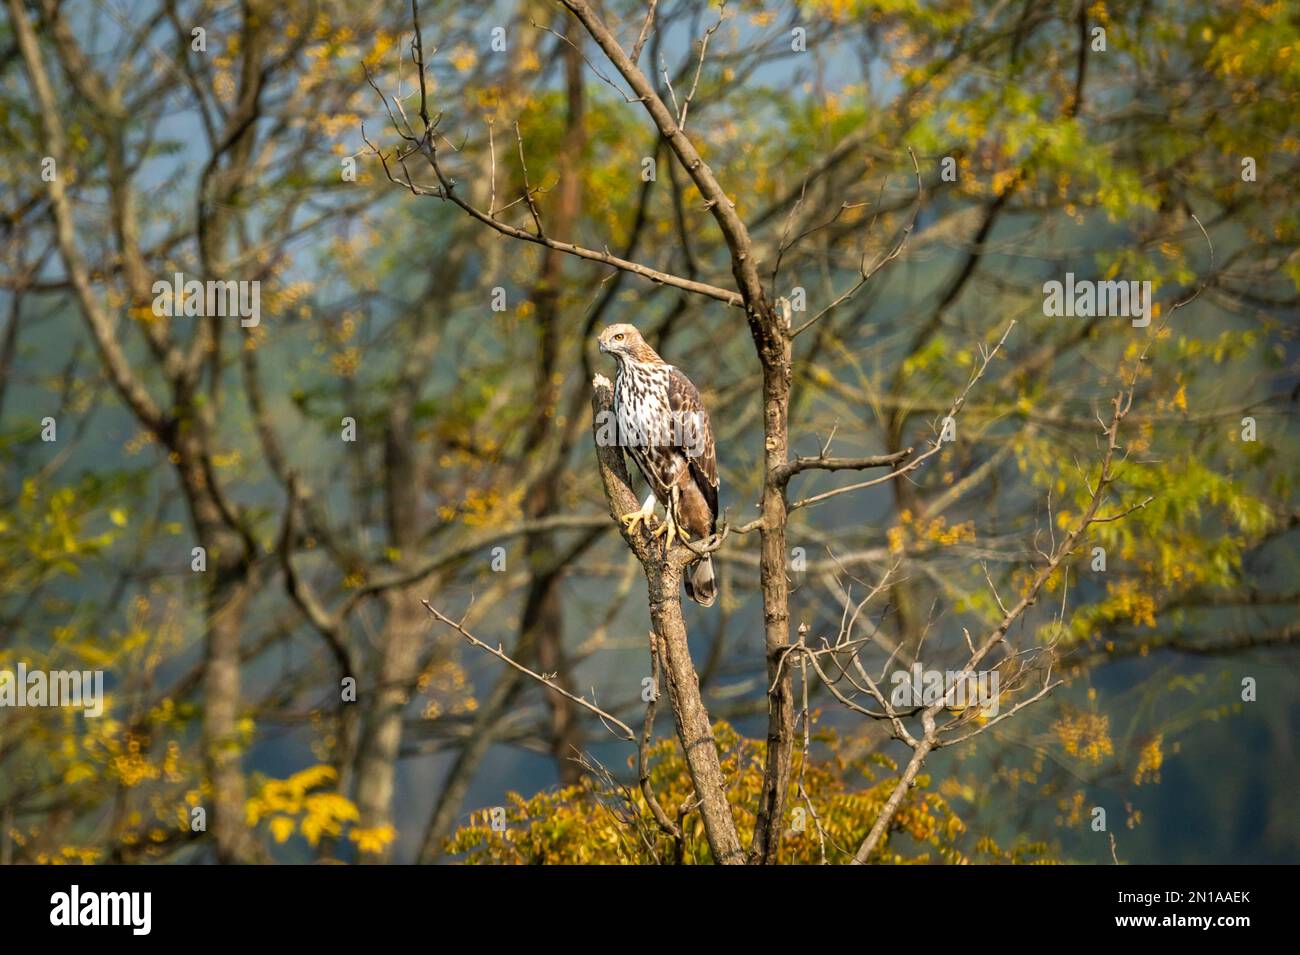 changeable or crested hawk eagle or nisaetus cirrhatus perched on tree in natural scenic view or frame in background at dhikala corbett natonal park Stock Photo